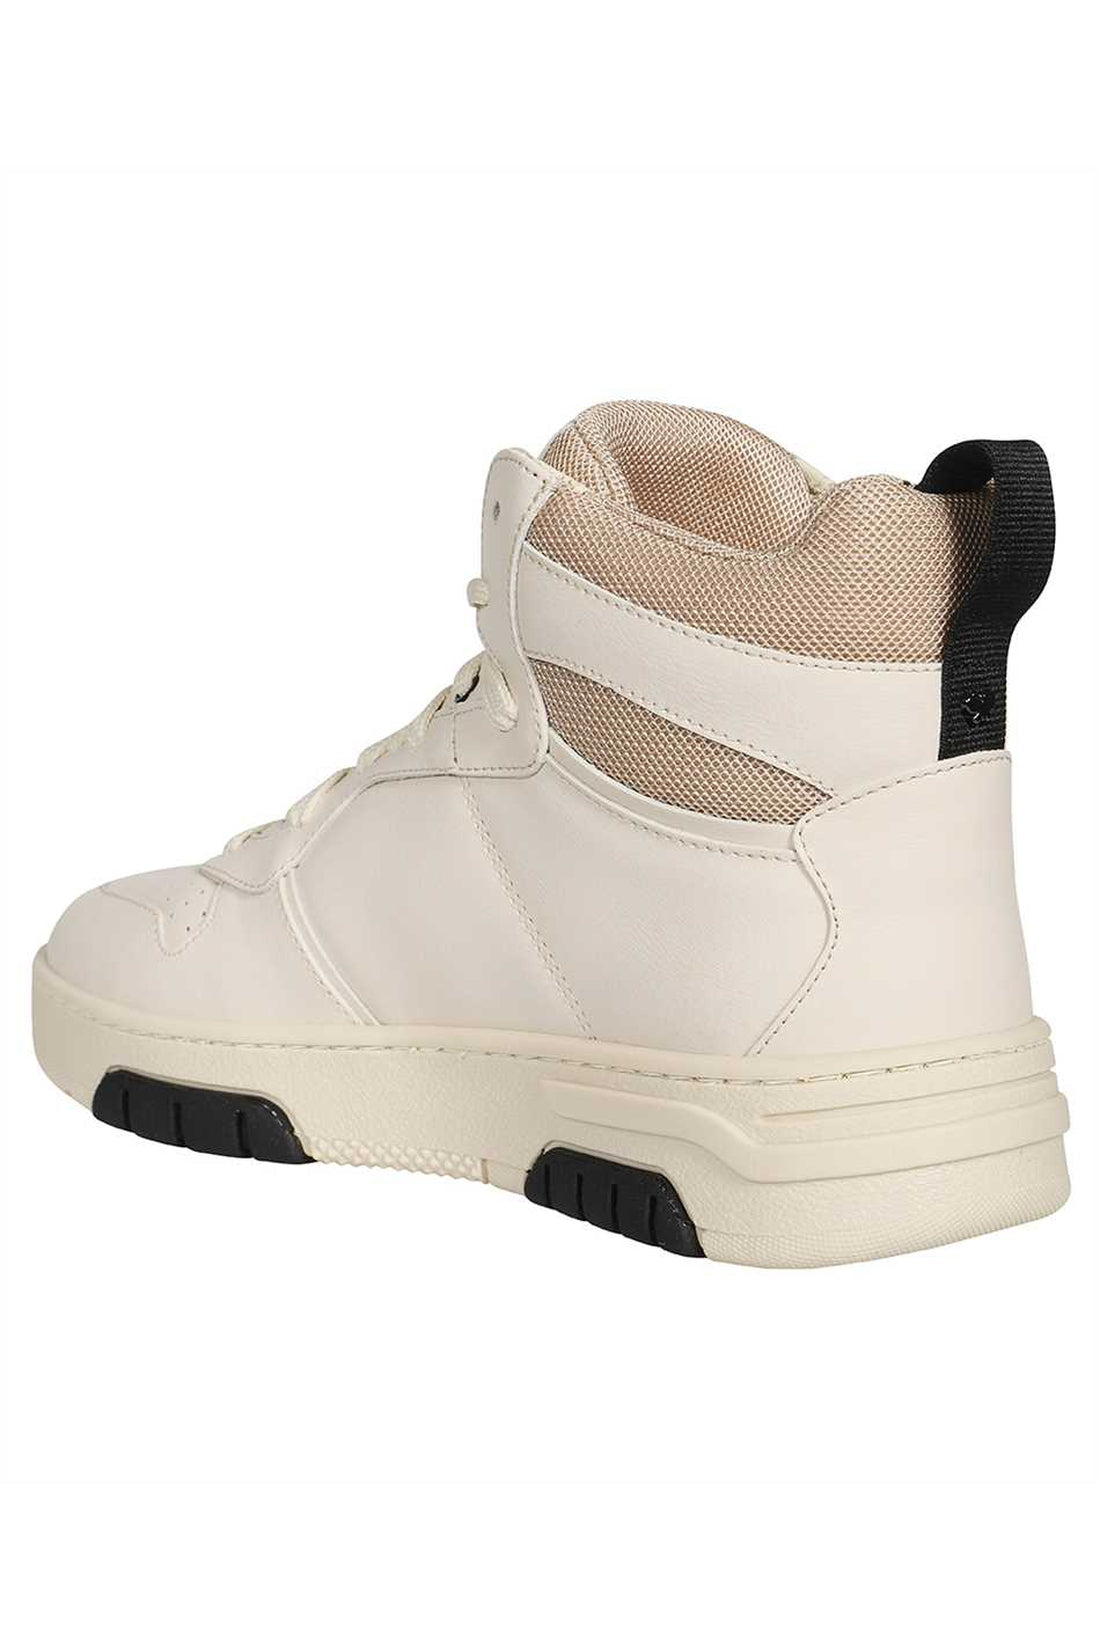 Max Mara-OUTLET-SALE-Miki high-top sneakers-ARCHIVIST